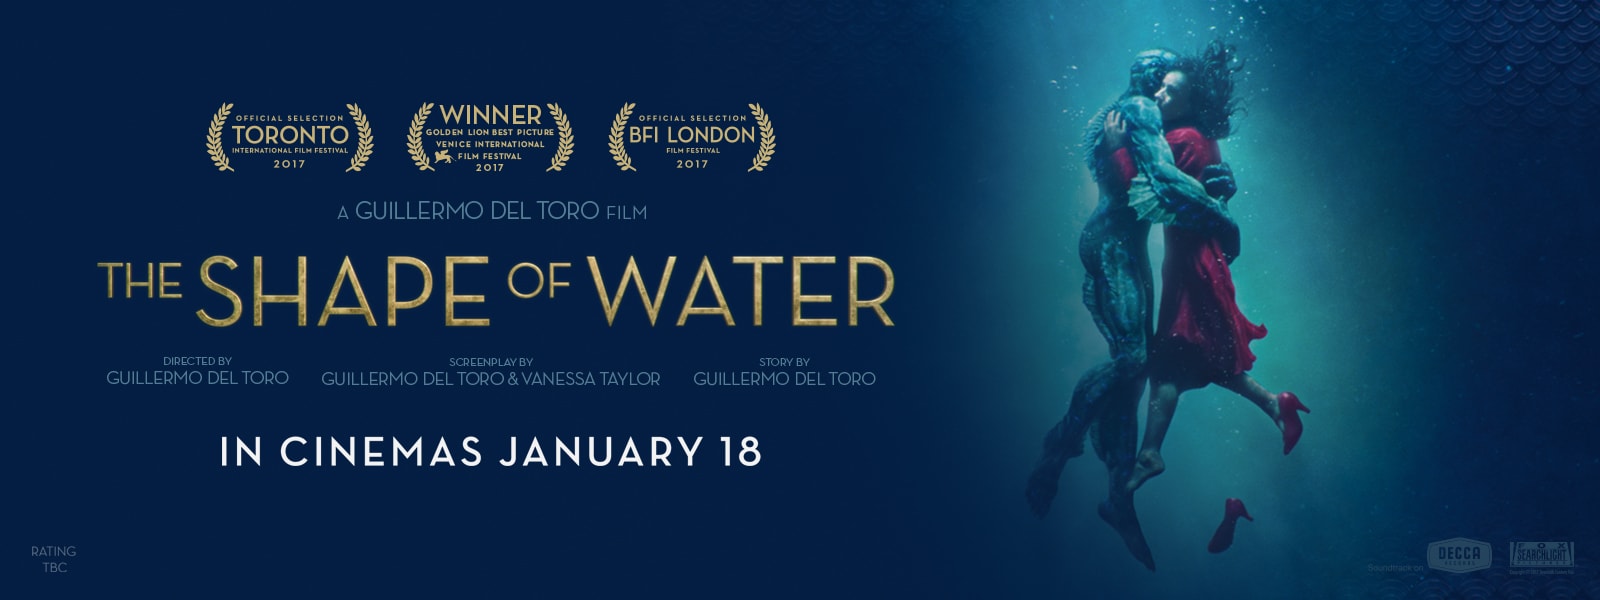 The Shape of Water 4K 2017 big poster